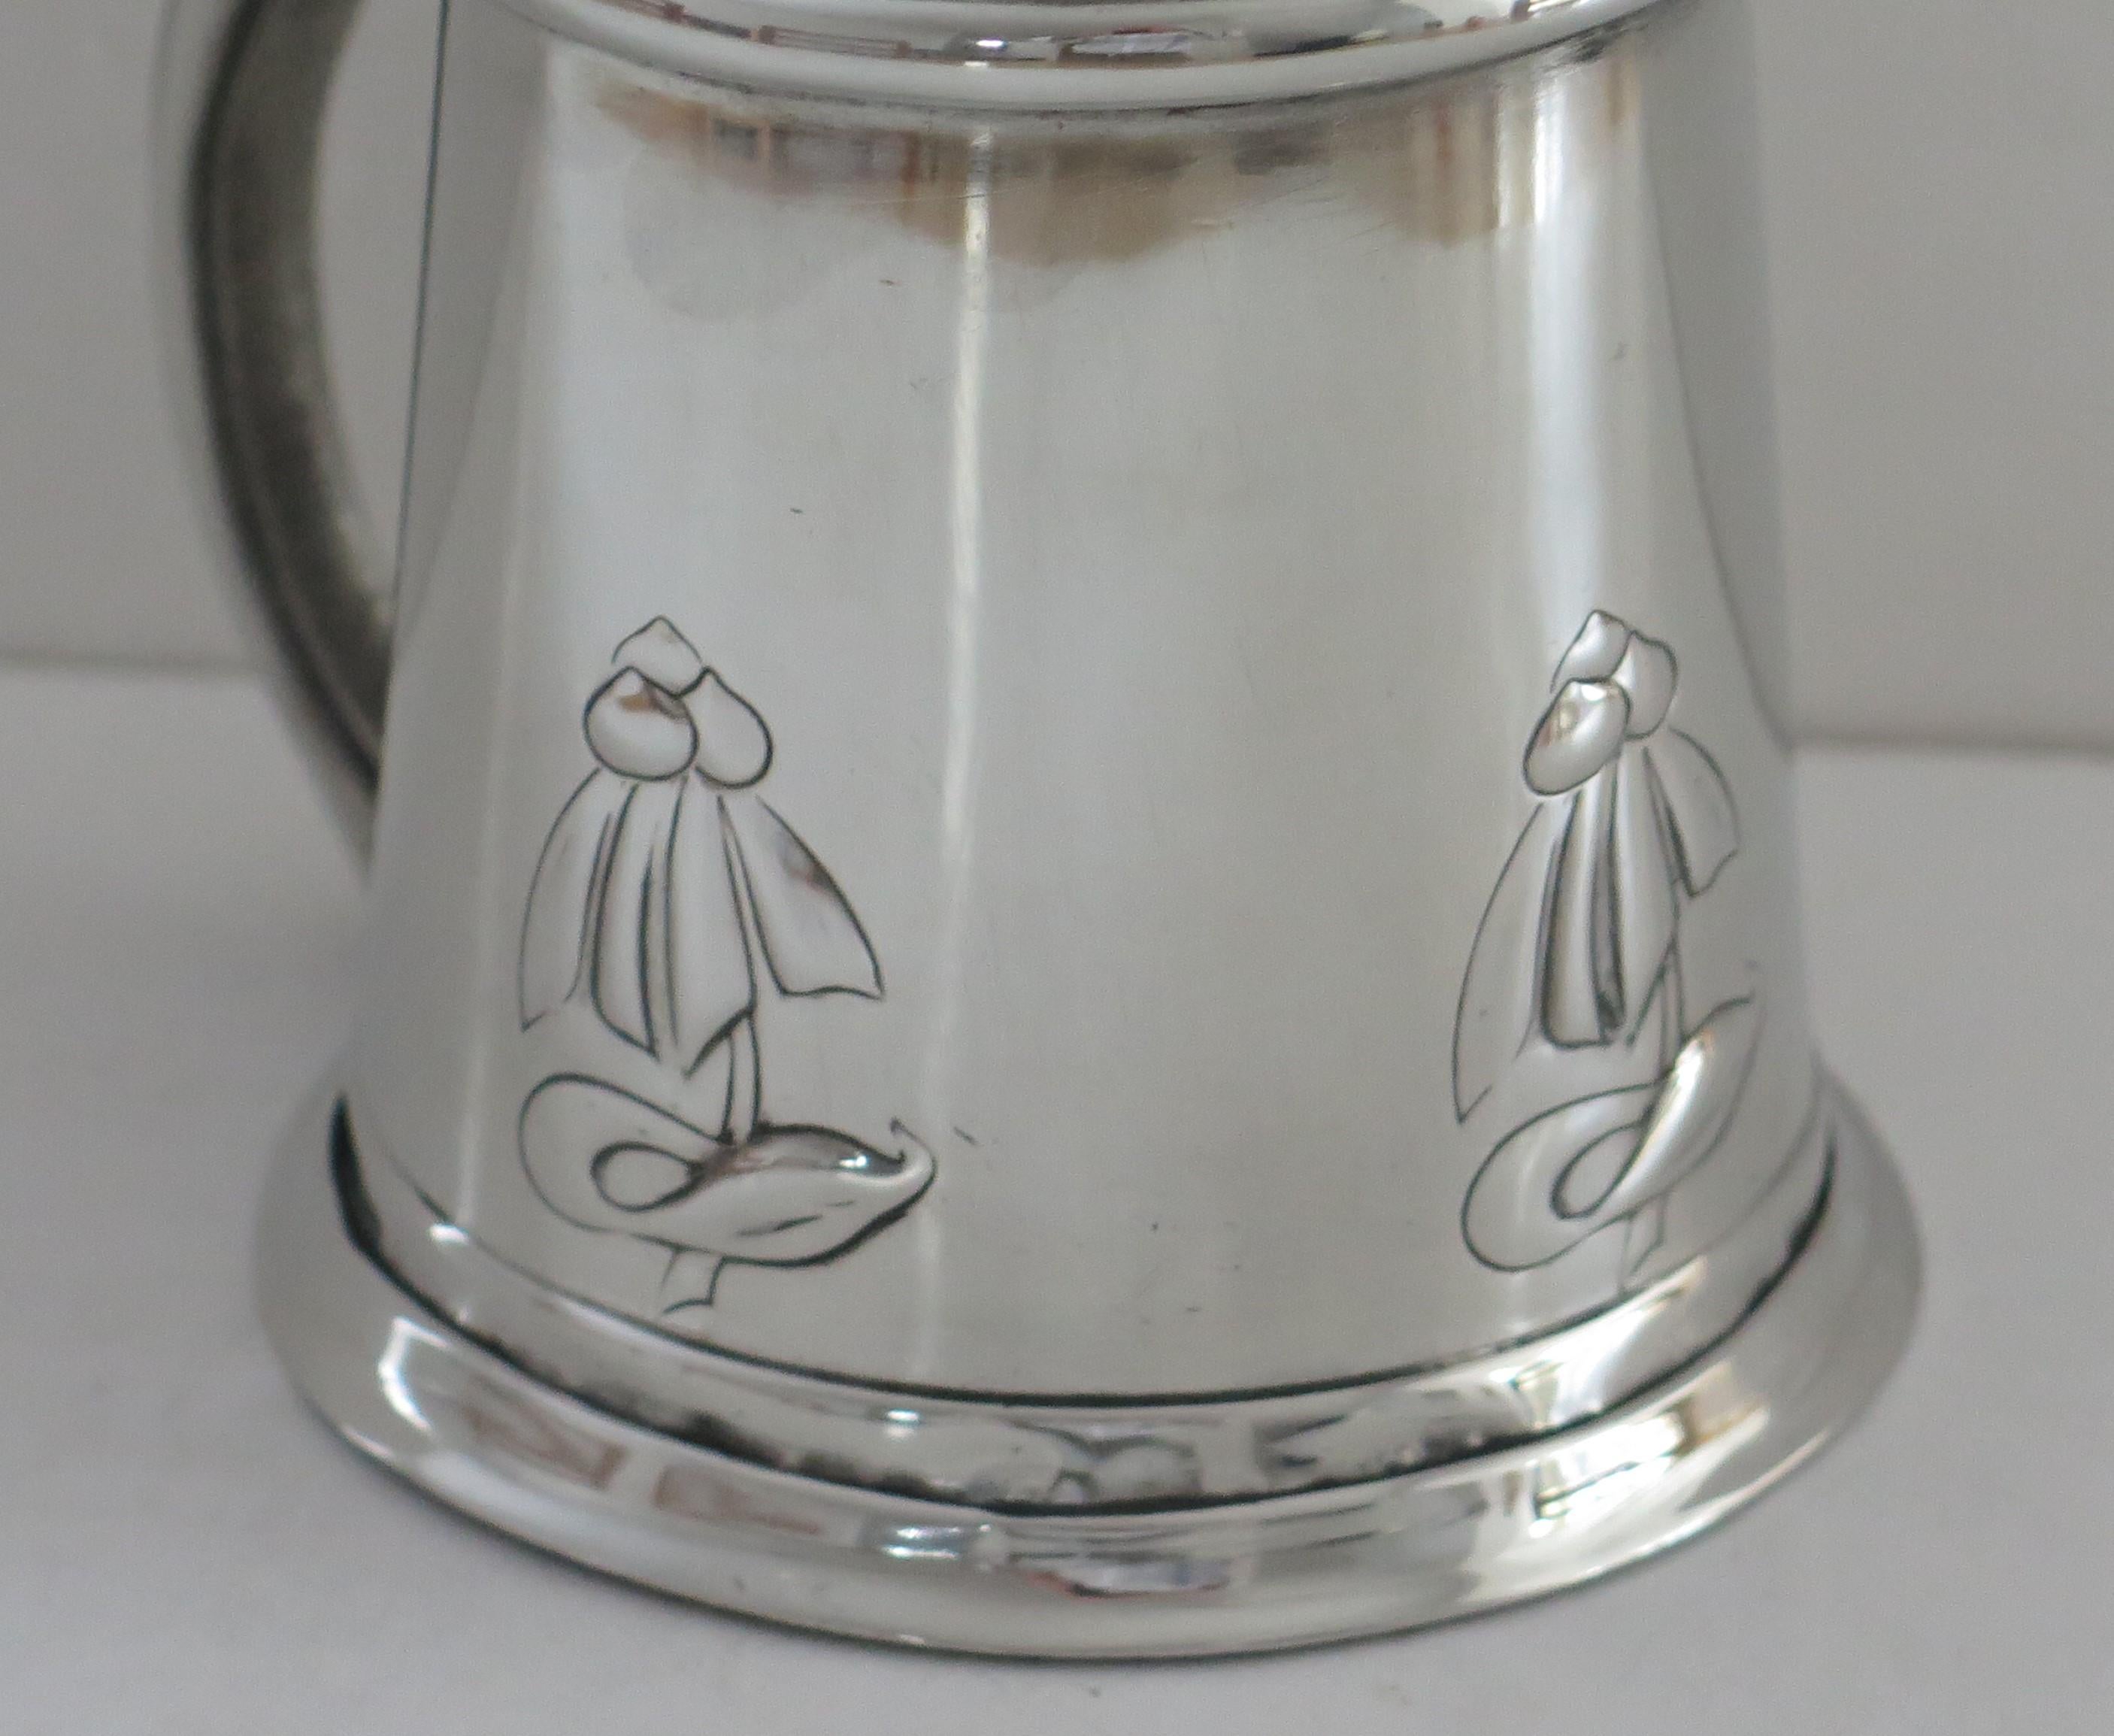 Hammered Pewter Tankard Designed by Archibald Knox for Liberty Tudric No. 053, circa 1902 For Sale